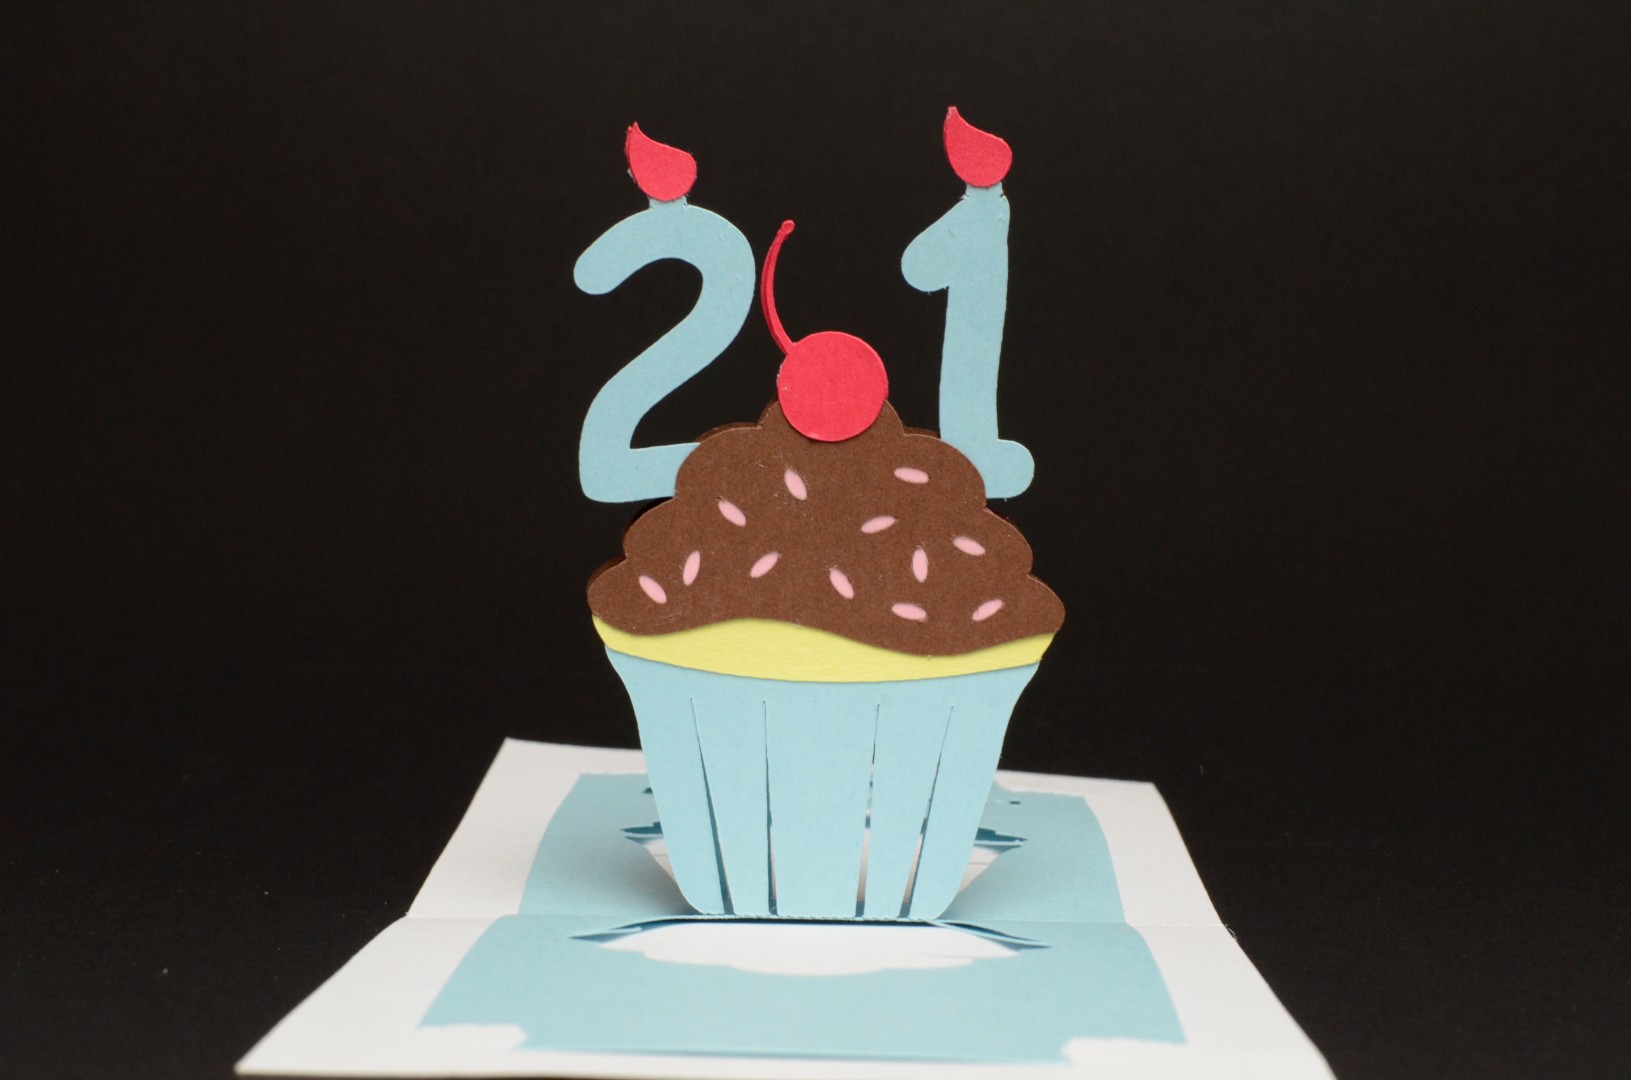 Details about   Yummy Cupcake Pop-Up Birthday Card Greeting Card by Up With Paper 